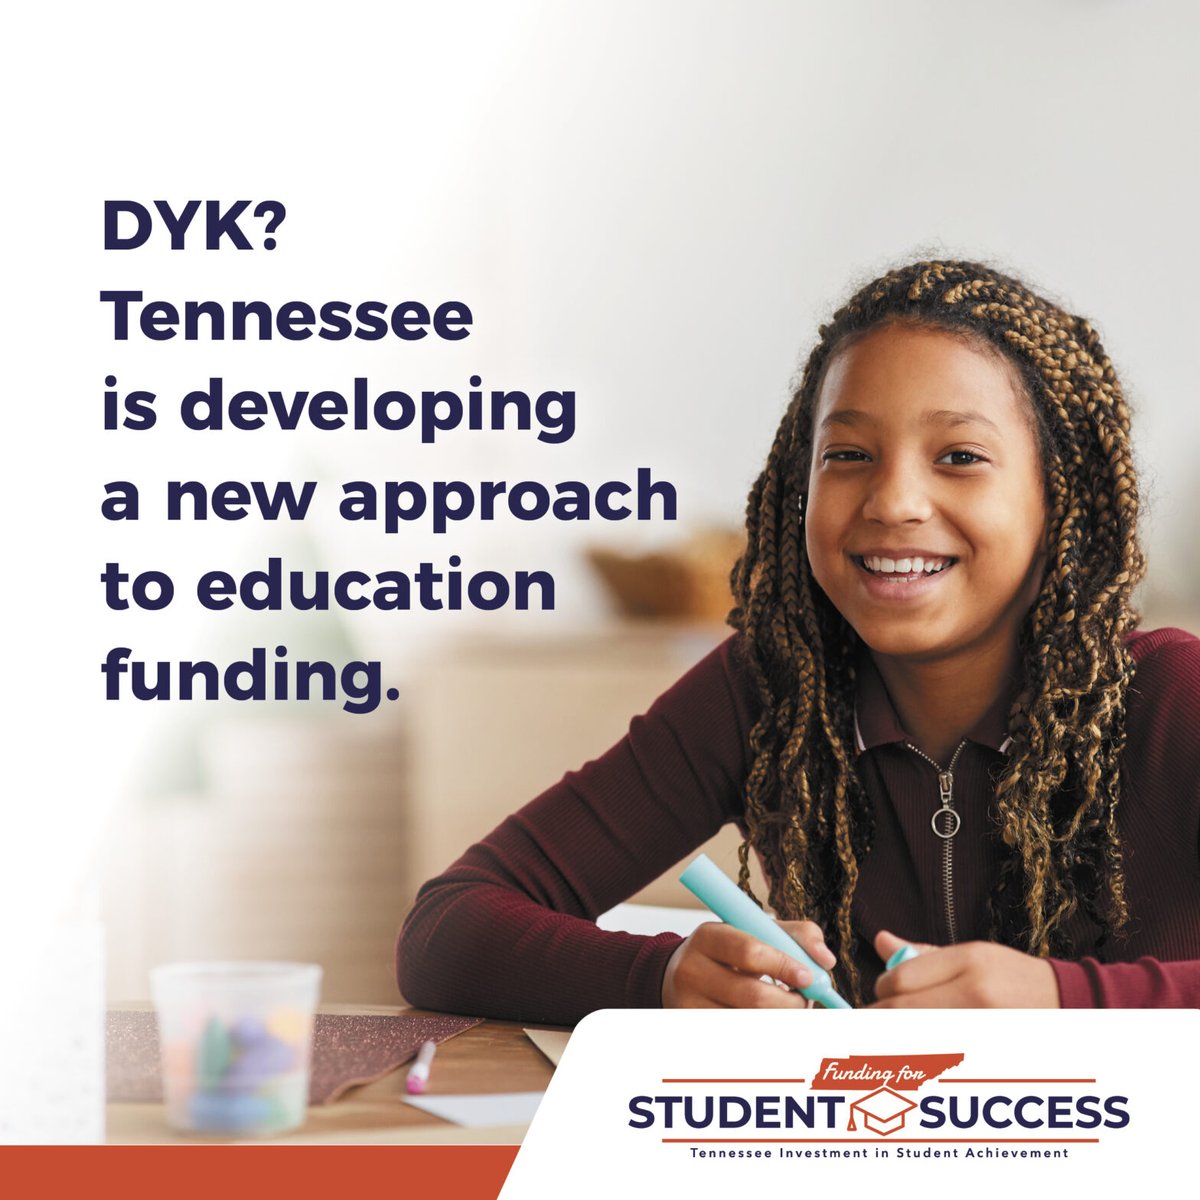 Tennessee is reimagining funding for all public-school students for the first time in more than thirty years. Click here to learn more: fundingforstudentsuccess.org #TNEduFunding